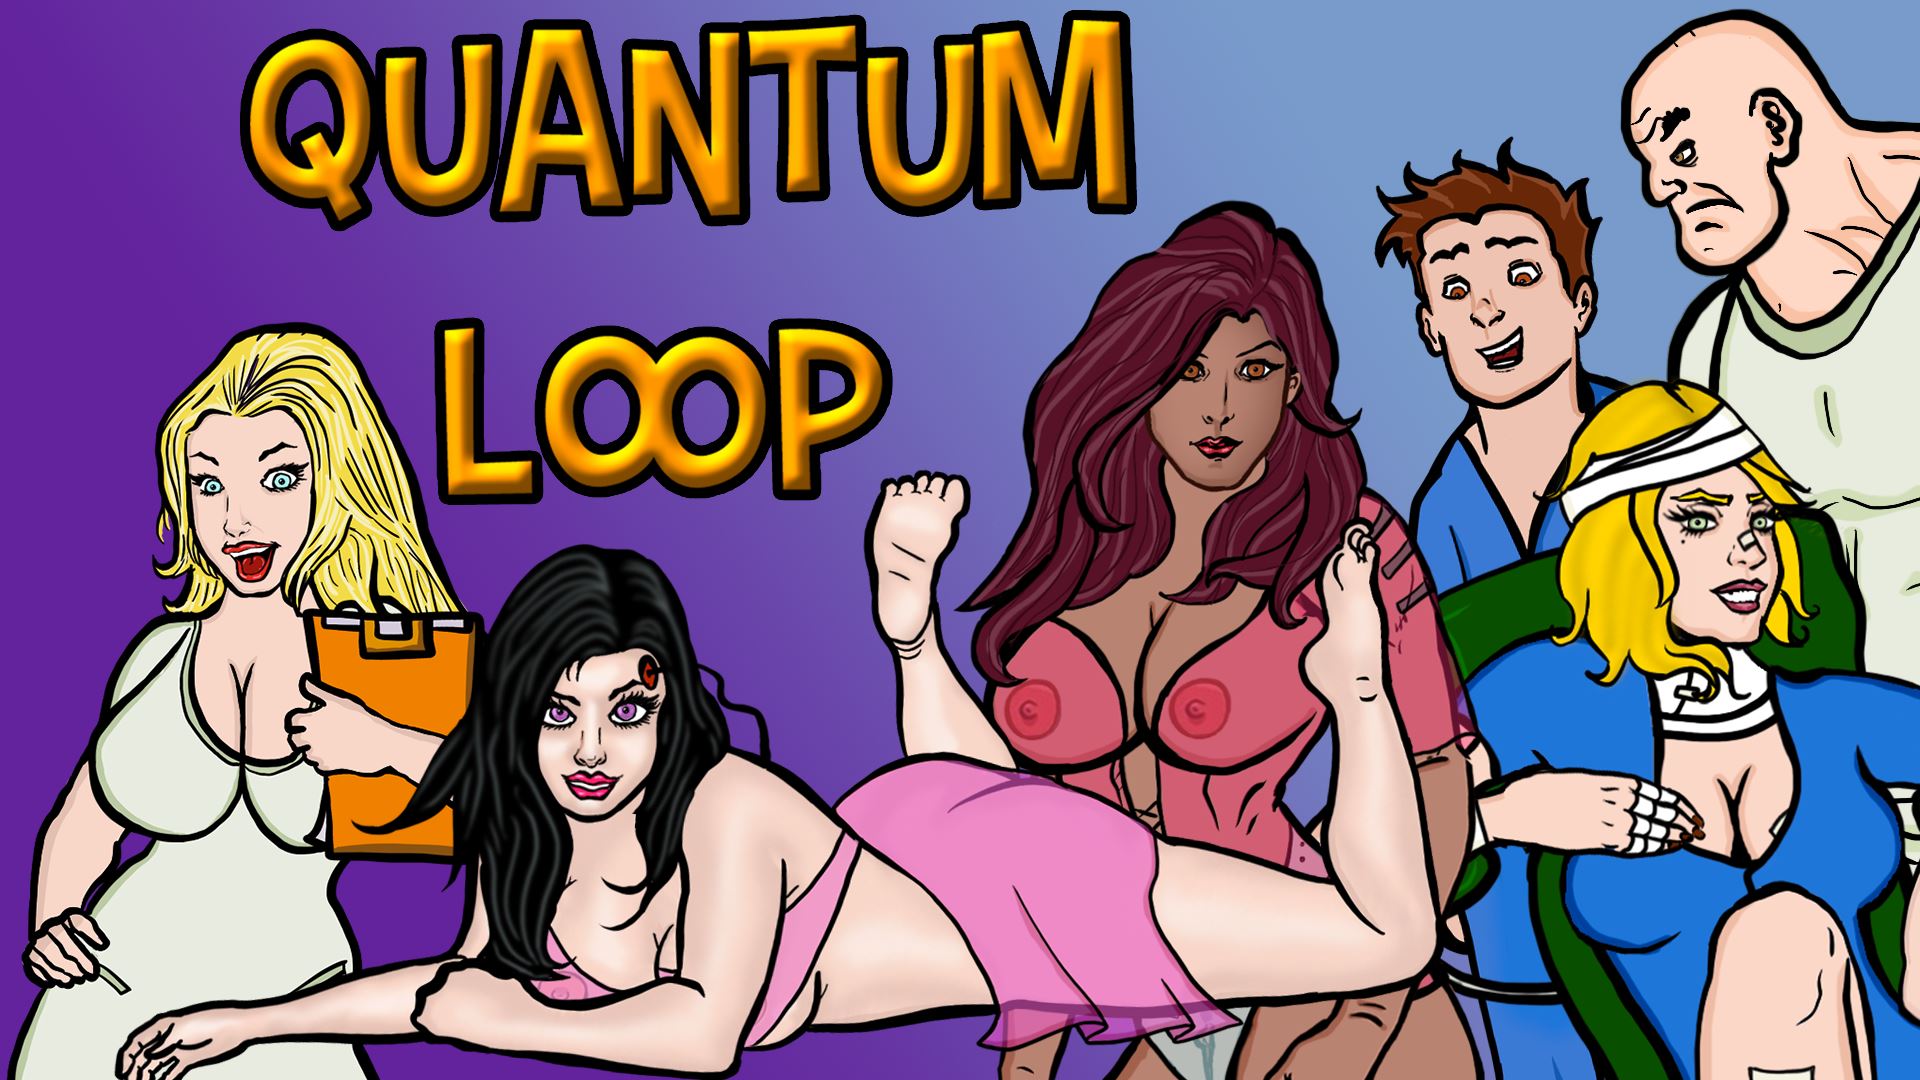 Quantum Loop Day 1: The Awakening porn xxx game download cover